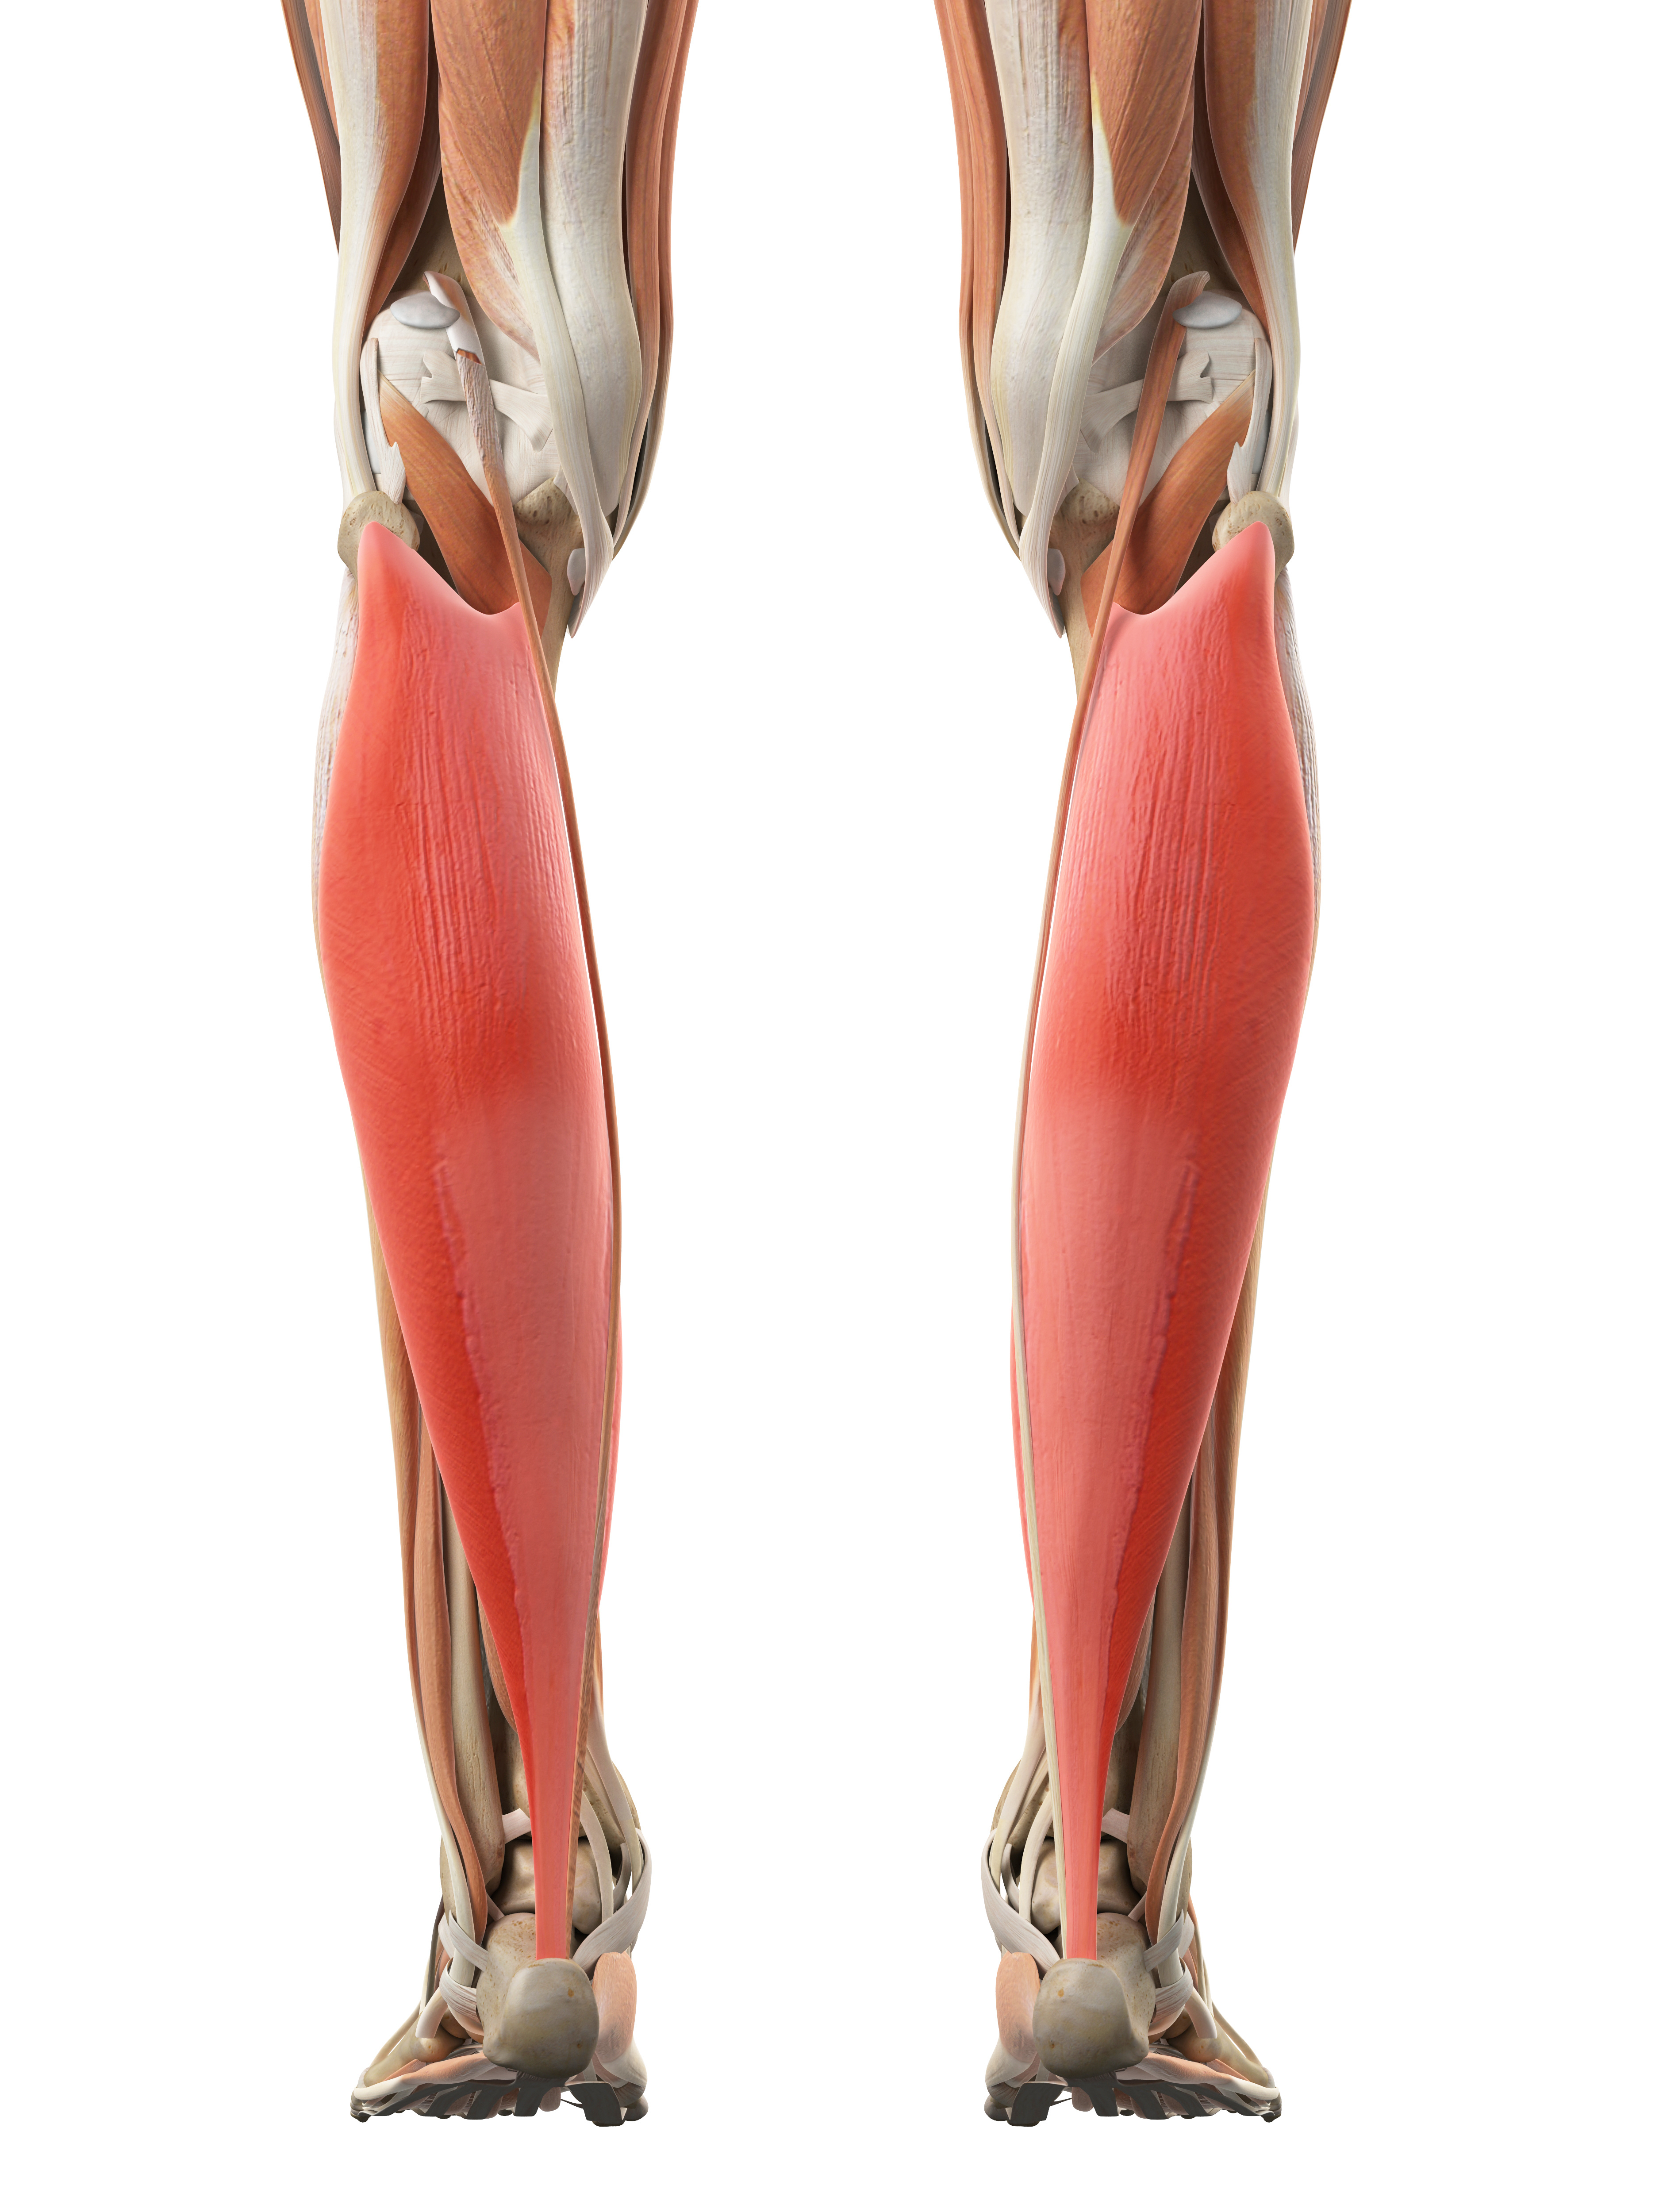 medically accurate illustration of the soleus